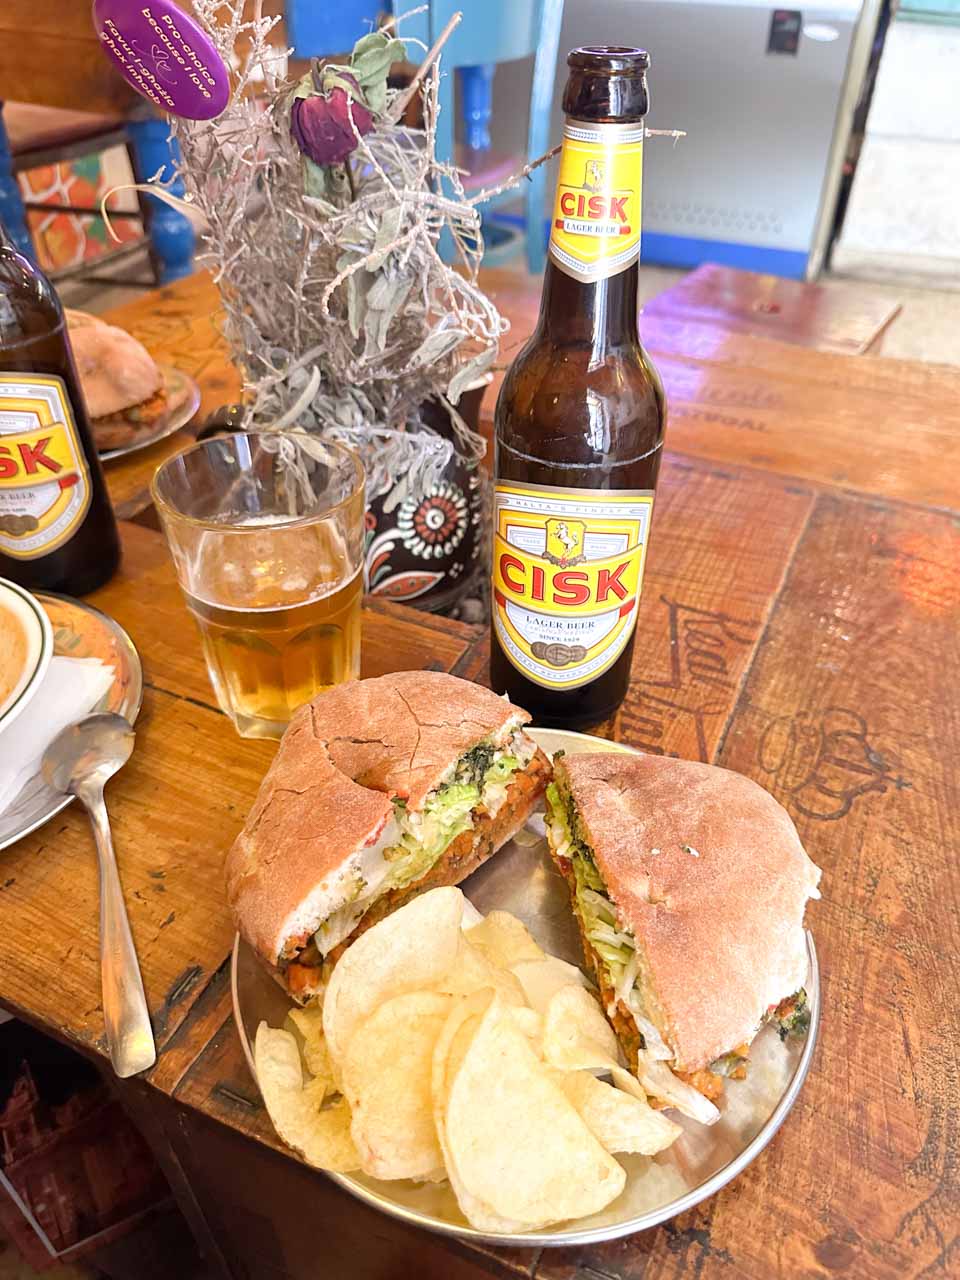 A ftira with a side of crisps, a bottle of Cisk beer, and a glass on a wooden table